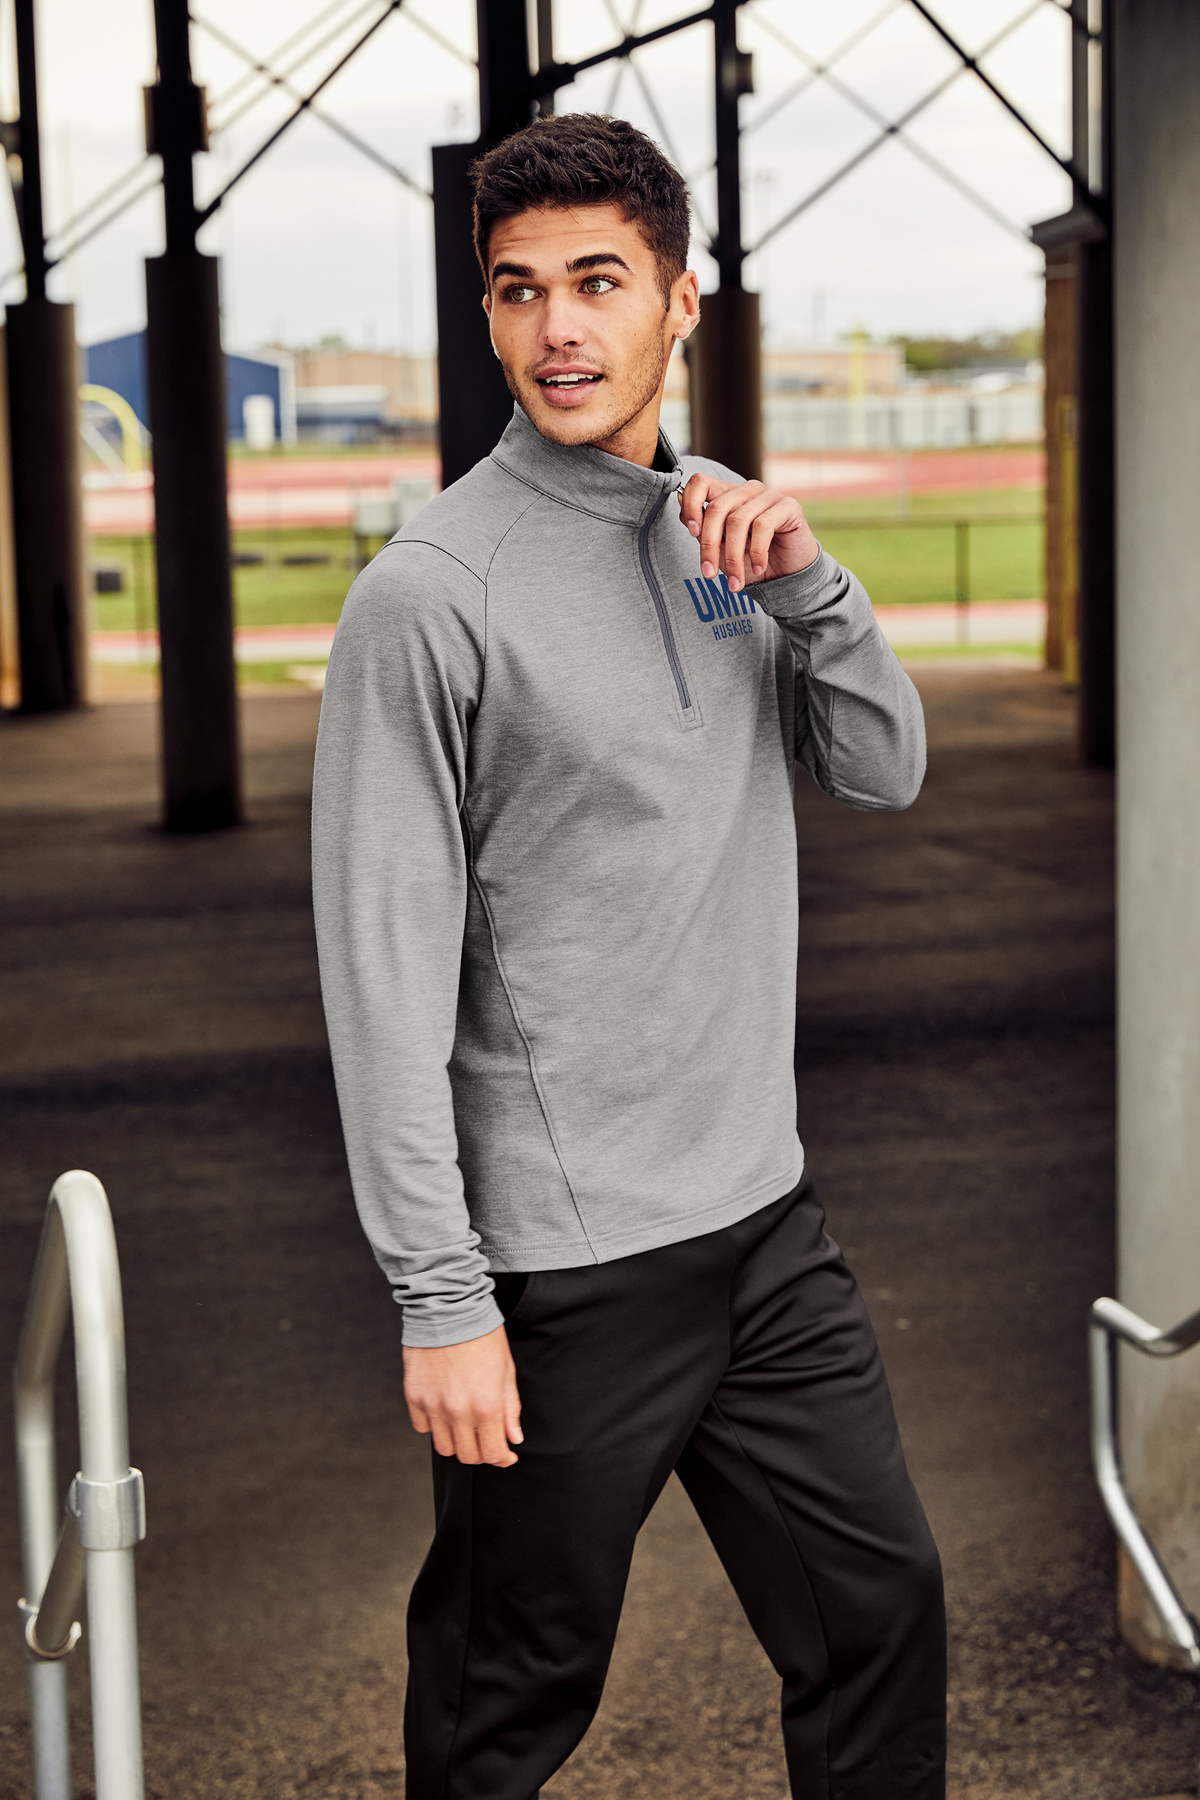 Silvertraq - An Active Wear you never knew you needed. The Flex Collection  comes with a Breathable, Quick Dry and Sweat Wicking Fabric designed to  give you the Ultimate Comfort while you